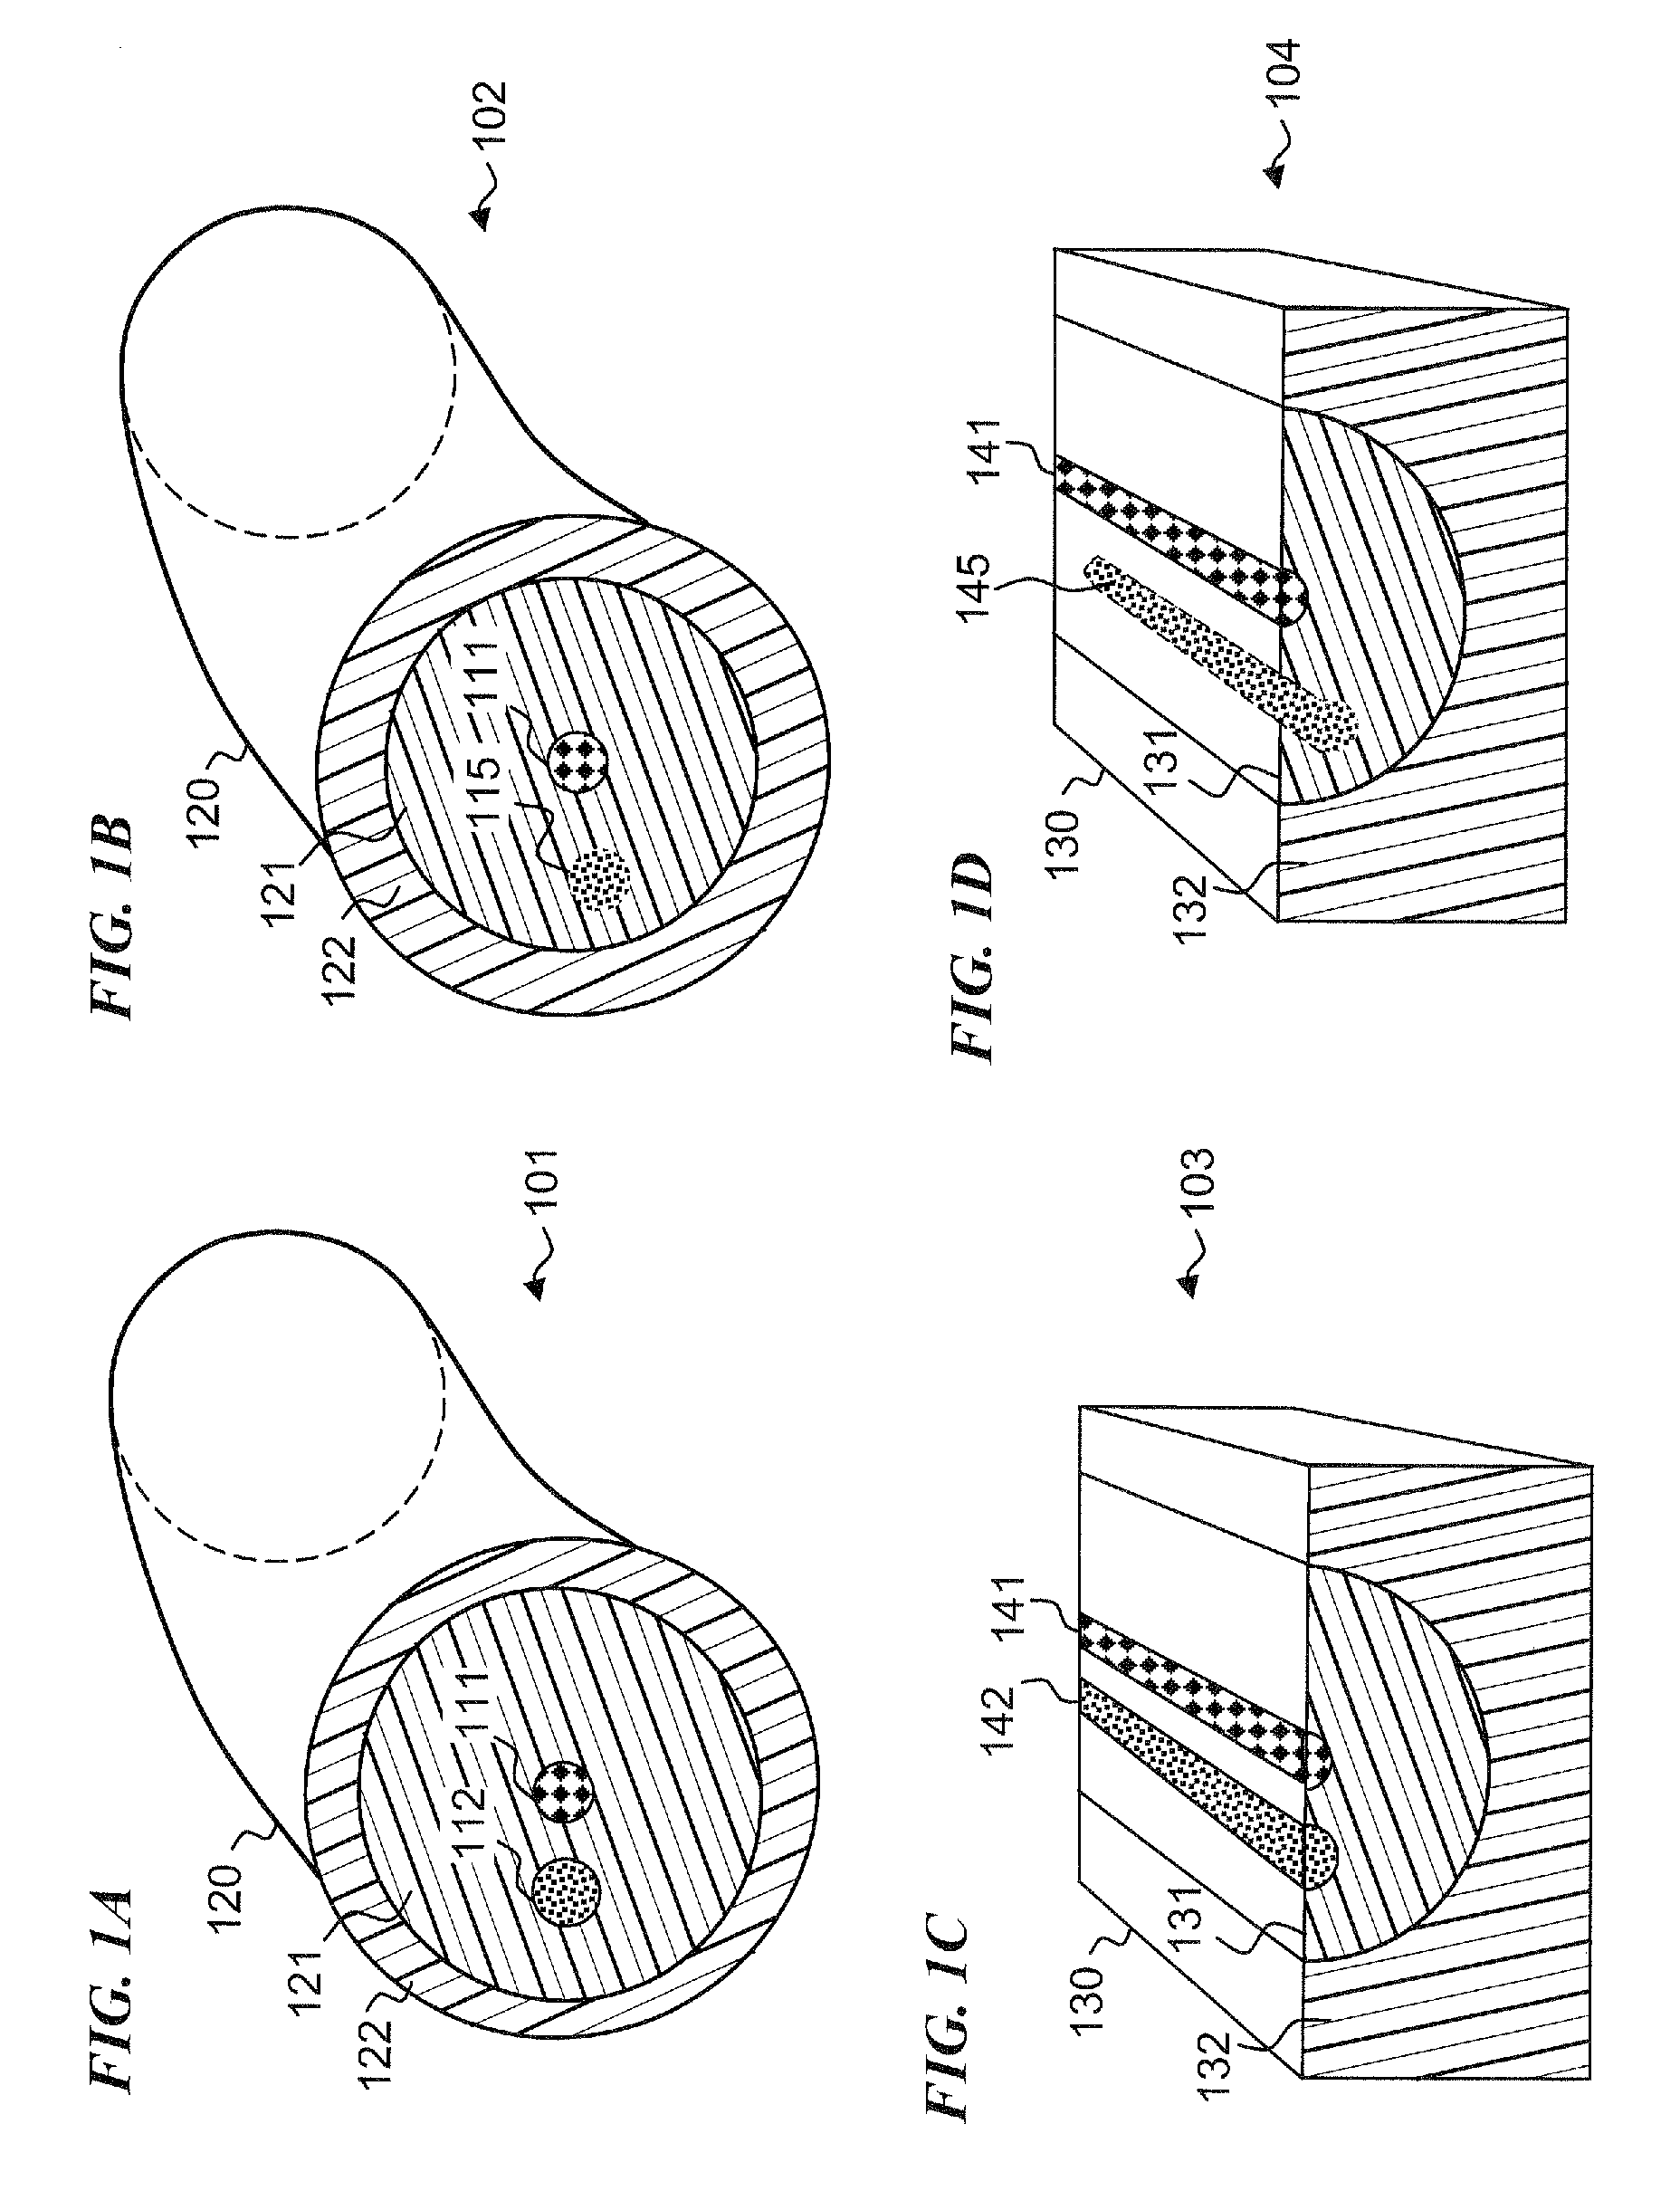 Apparatus and method for a high-gain double-clad amplifier